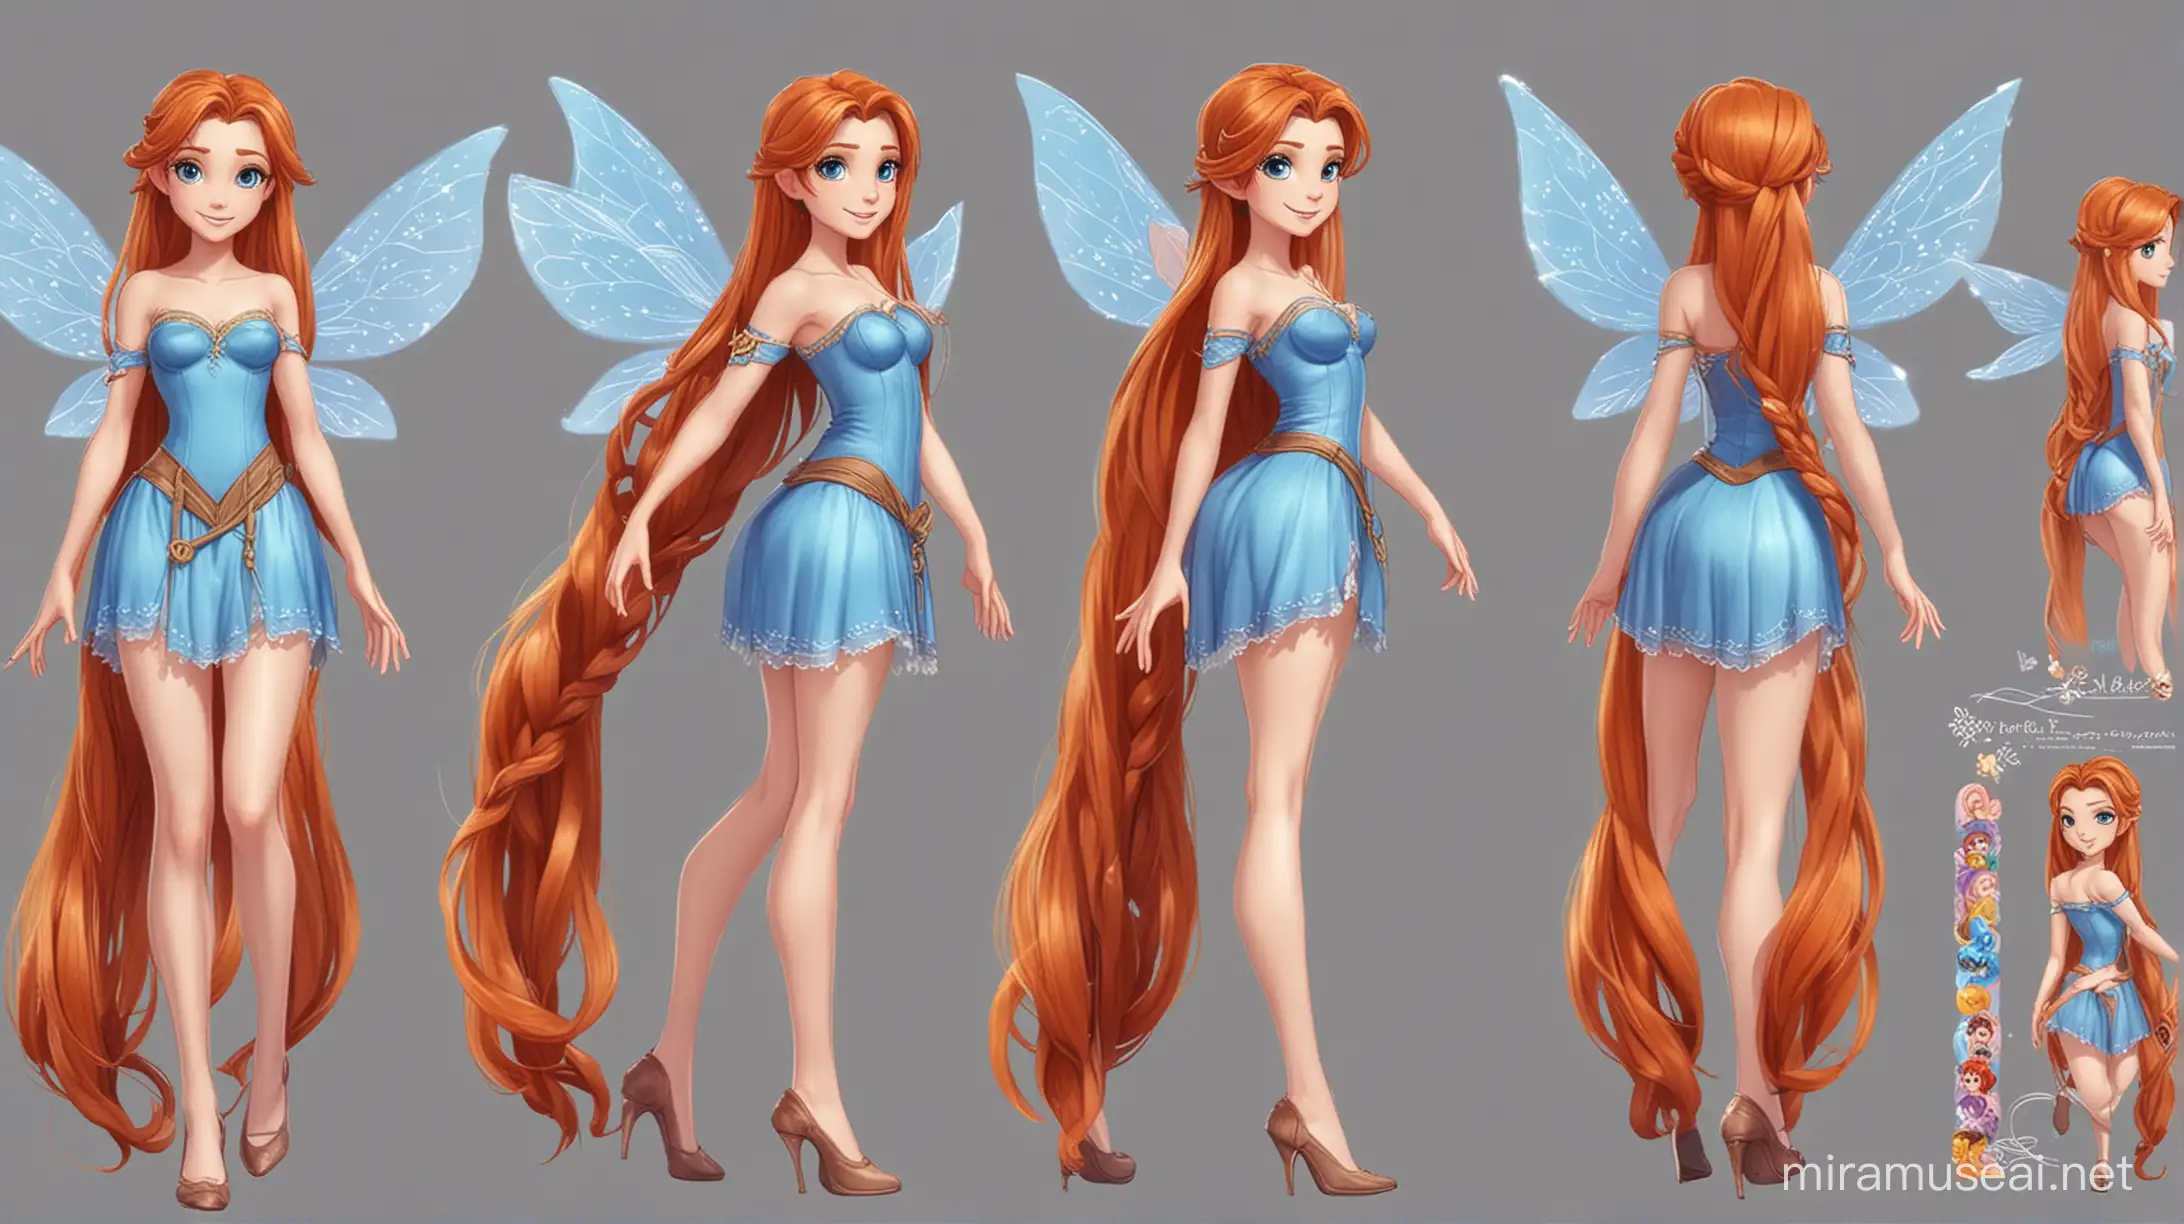 Rapunzel Inspired Winx Fairy with Long Red Braided Hair and Fairy Wings